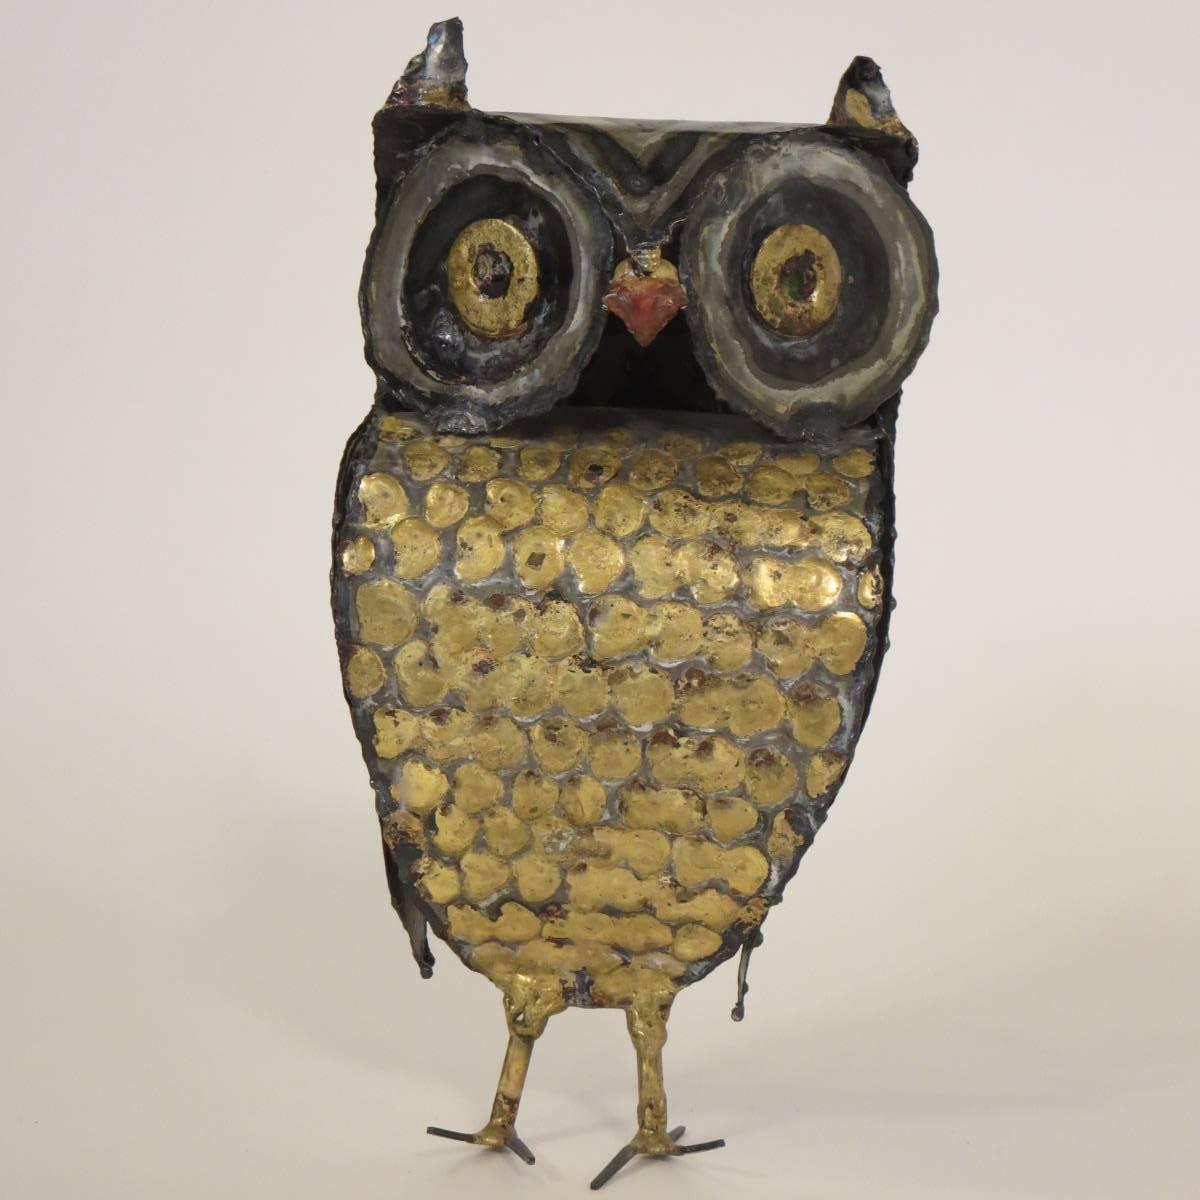 1970s metal owl sculpture, signed E. Garfinkle with gold paint accents.